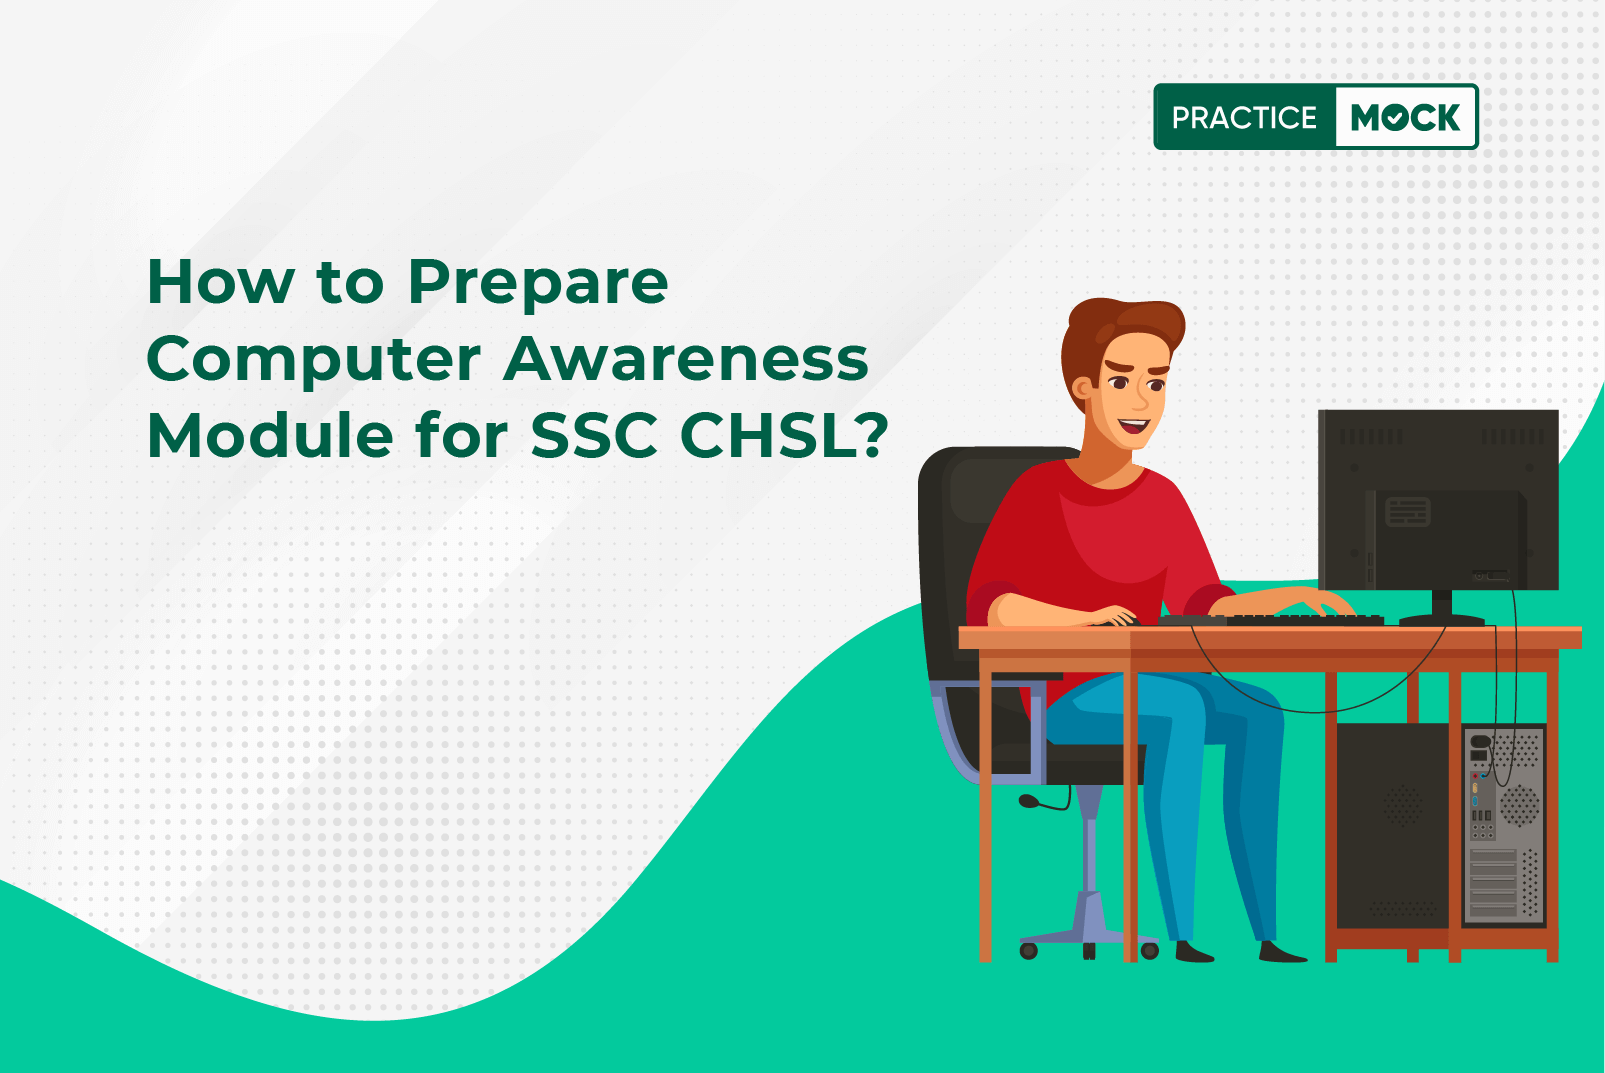 How to Prepare Computer Awareness Module for SSC CHSL